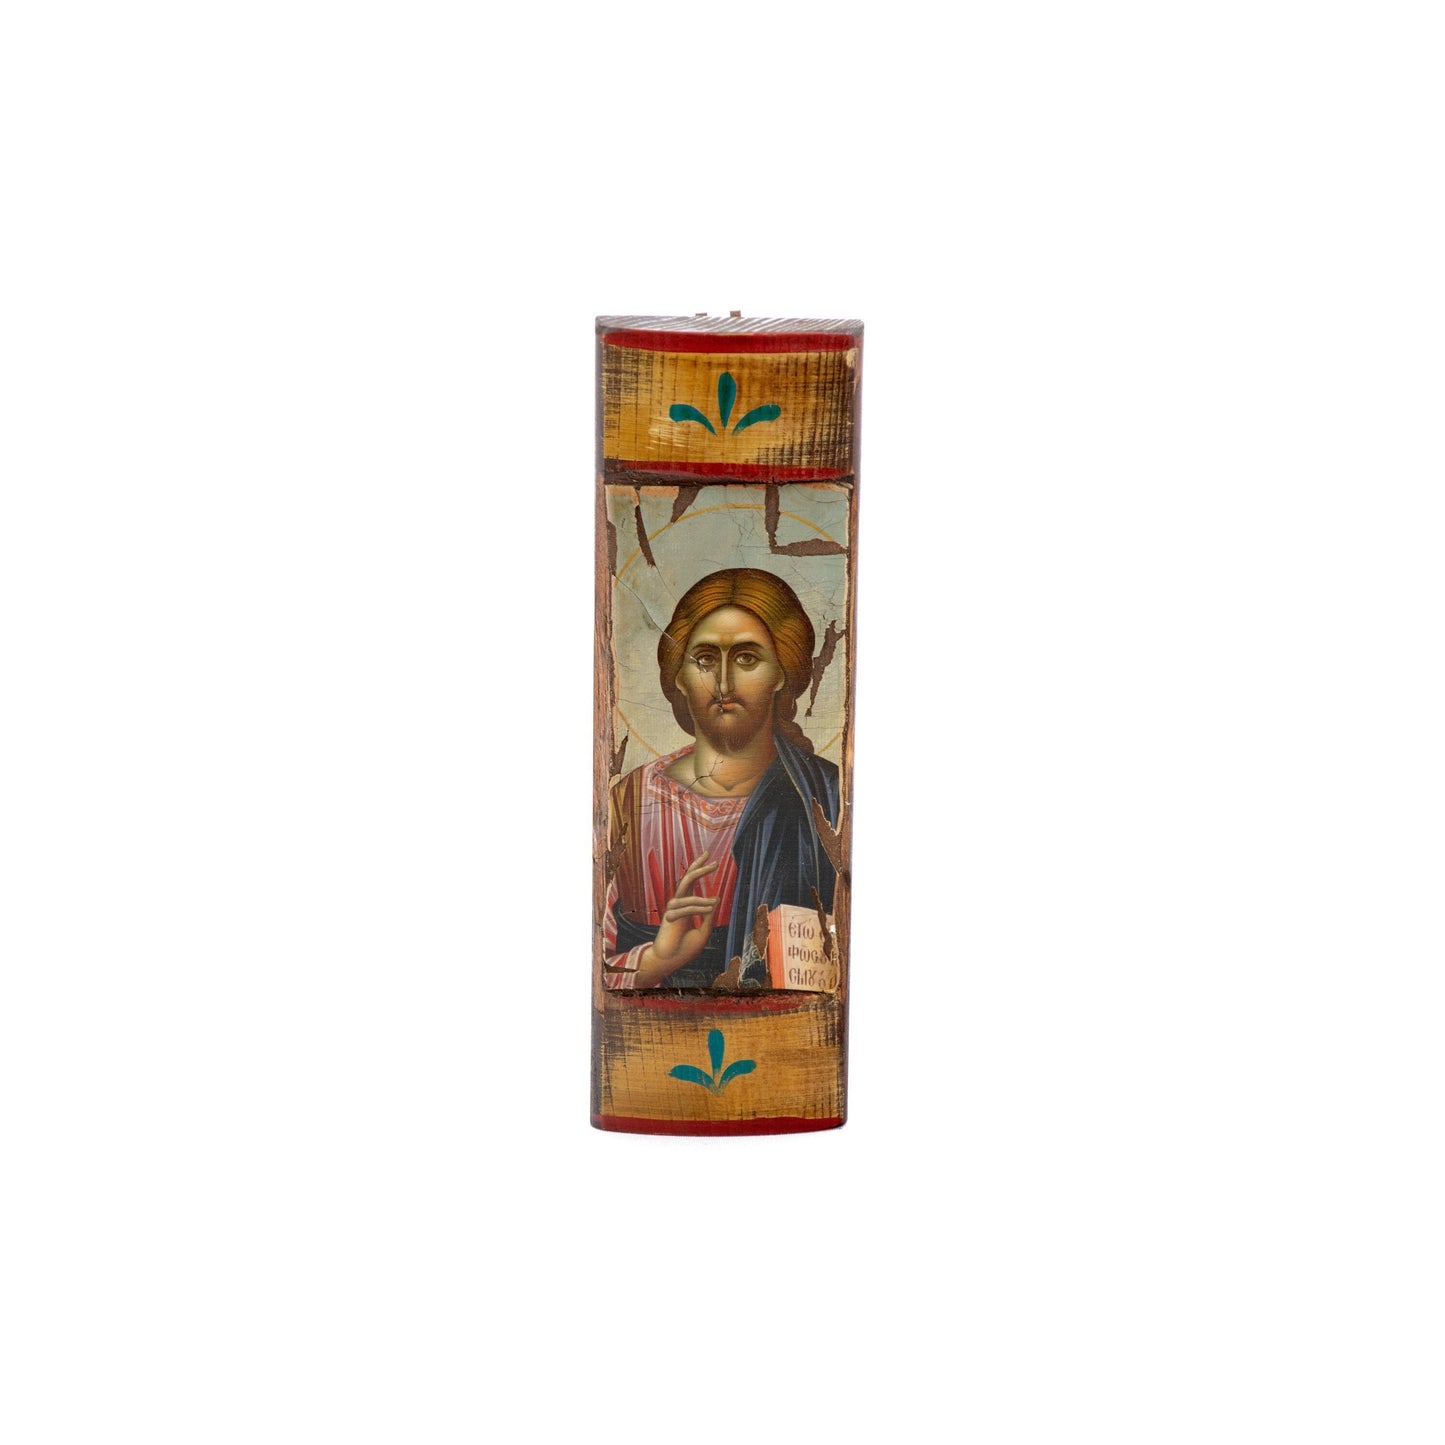 Jesus Christ icon, Handmade Greek Orthodox icon of our Lord, Byzantine art wall hanging canvas icon wood plaque 30x9cm, wedding gift TheHolyArt